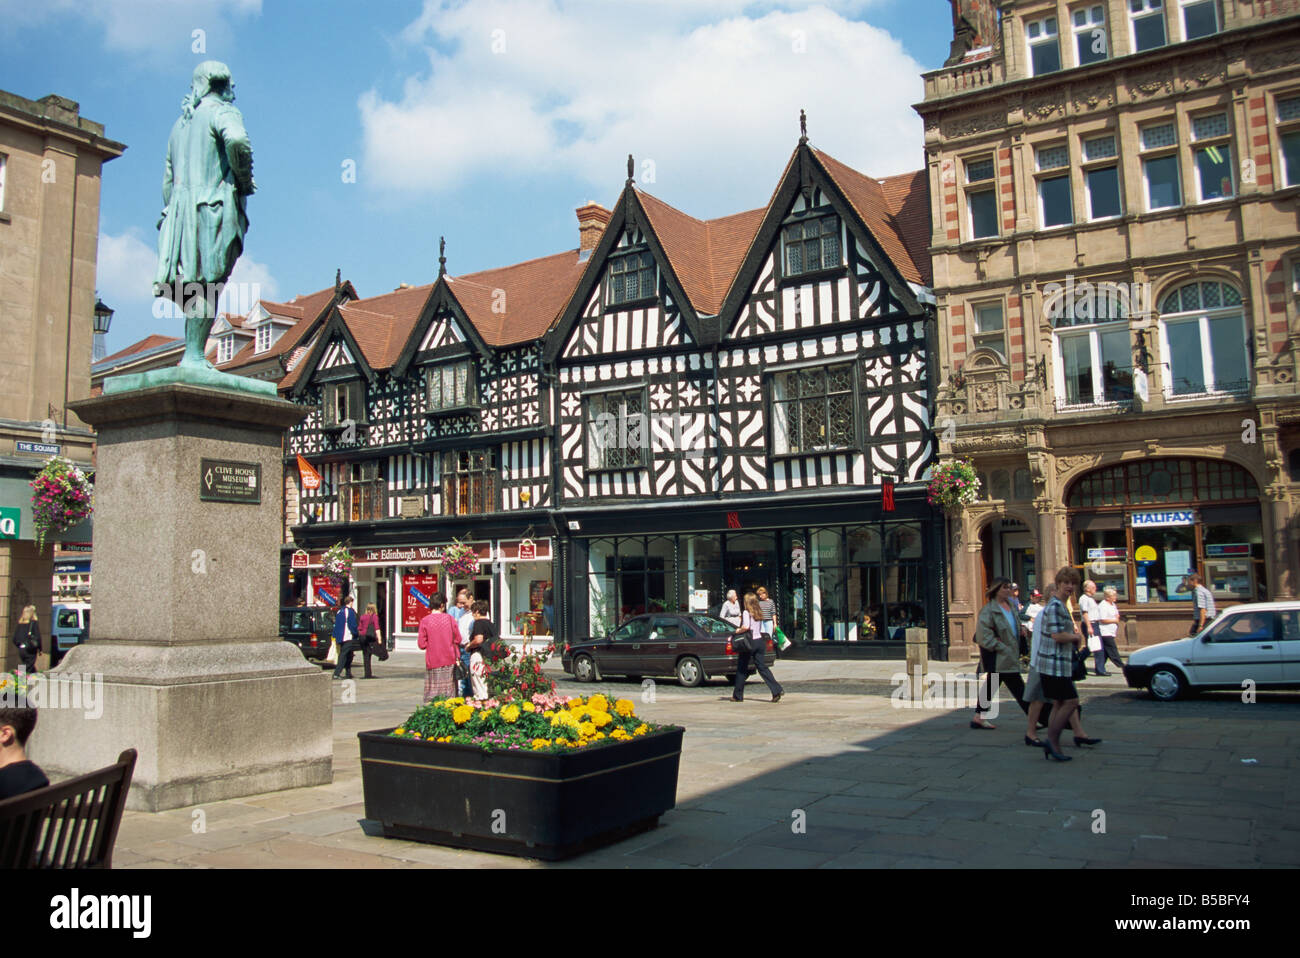 The Square and High Street with statue of Clive, Shrewsbury, Shropshire, England, Europe Stock Photo